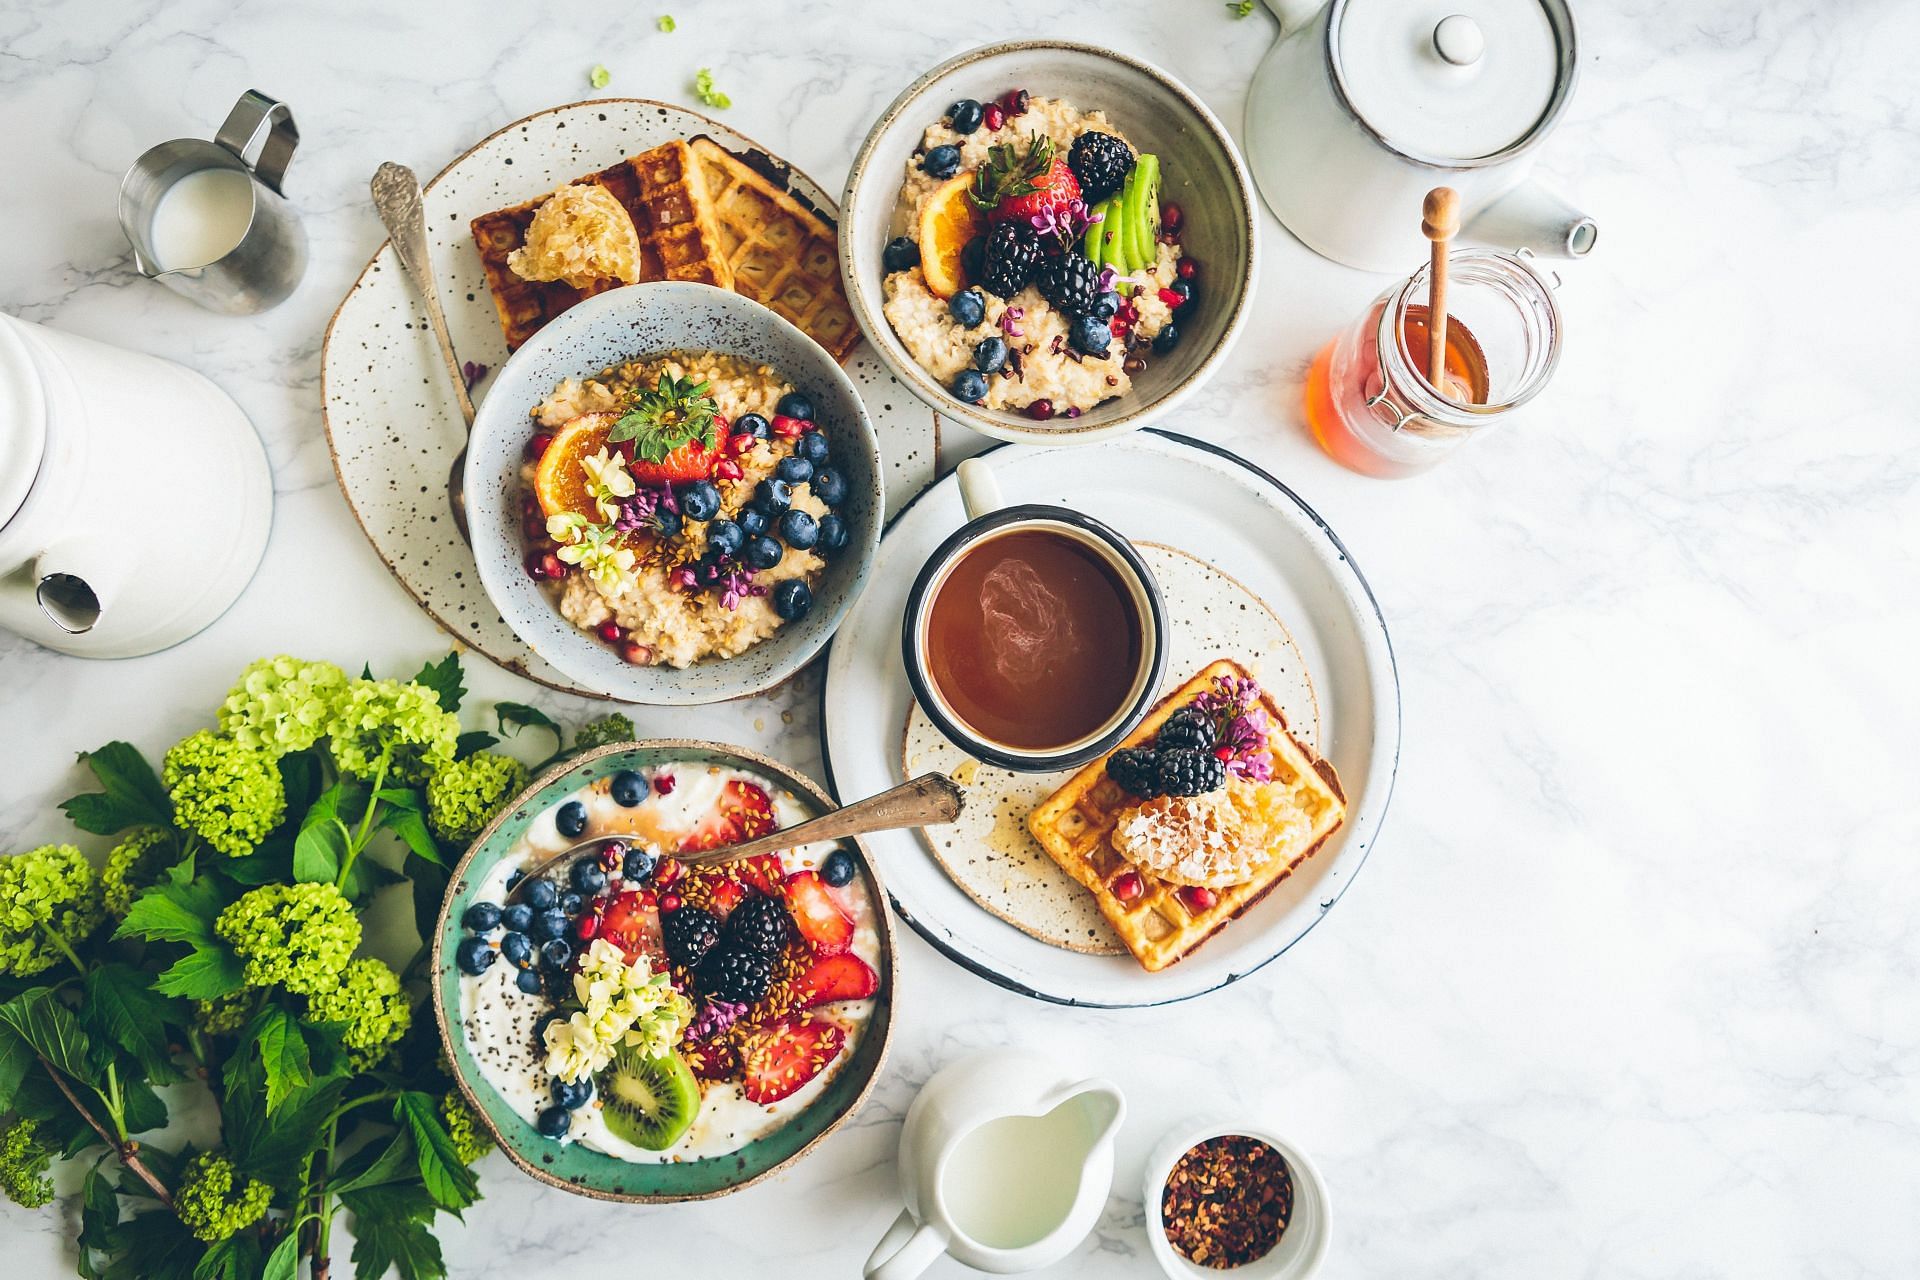 A Wholesome Breakfast for an Active Morning (Image via Unsplash/Brooke Lark)